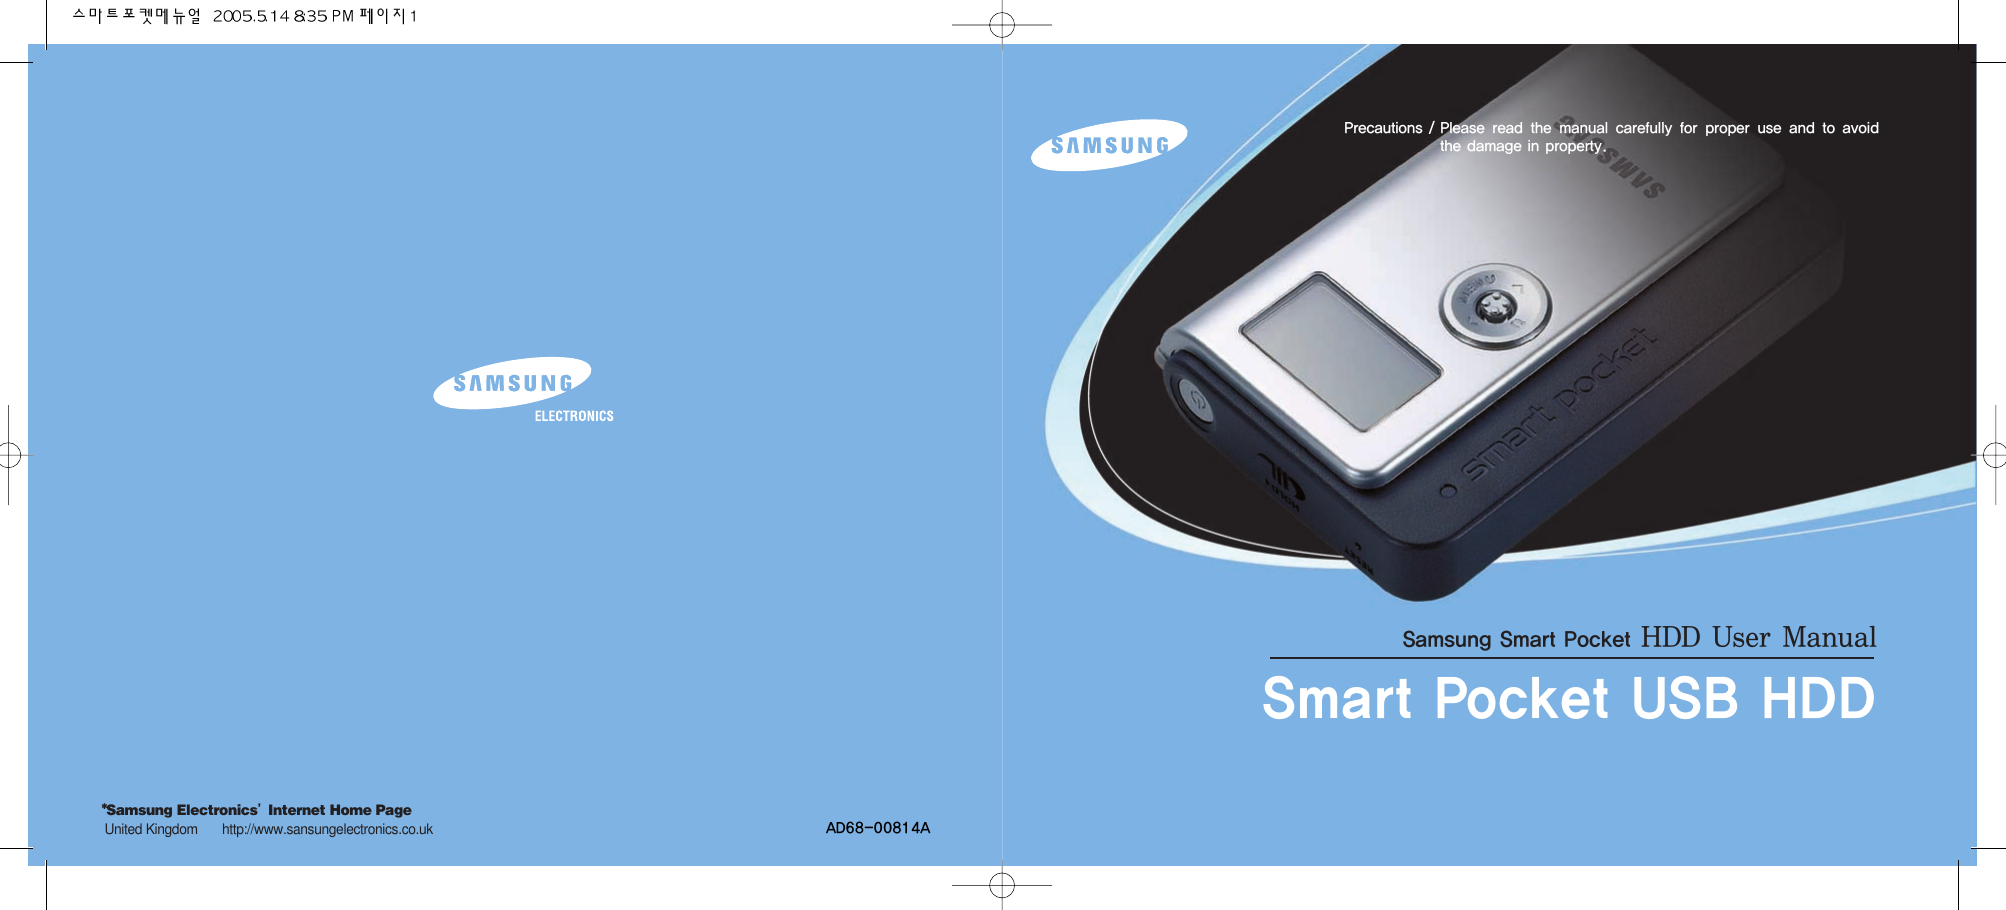 Precautions / Please read the  manual  carefully for  proper  use and  to  avoidthe damage in property.*Samsung Electronics’Internet Home PageUnited Kingdom       http://www.sansungelectronics.co.ukSamsung Smart Pocket HDD User ManualSmart Pocket USB HDDAD68-00814A